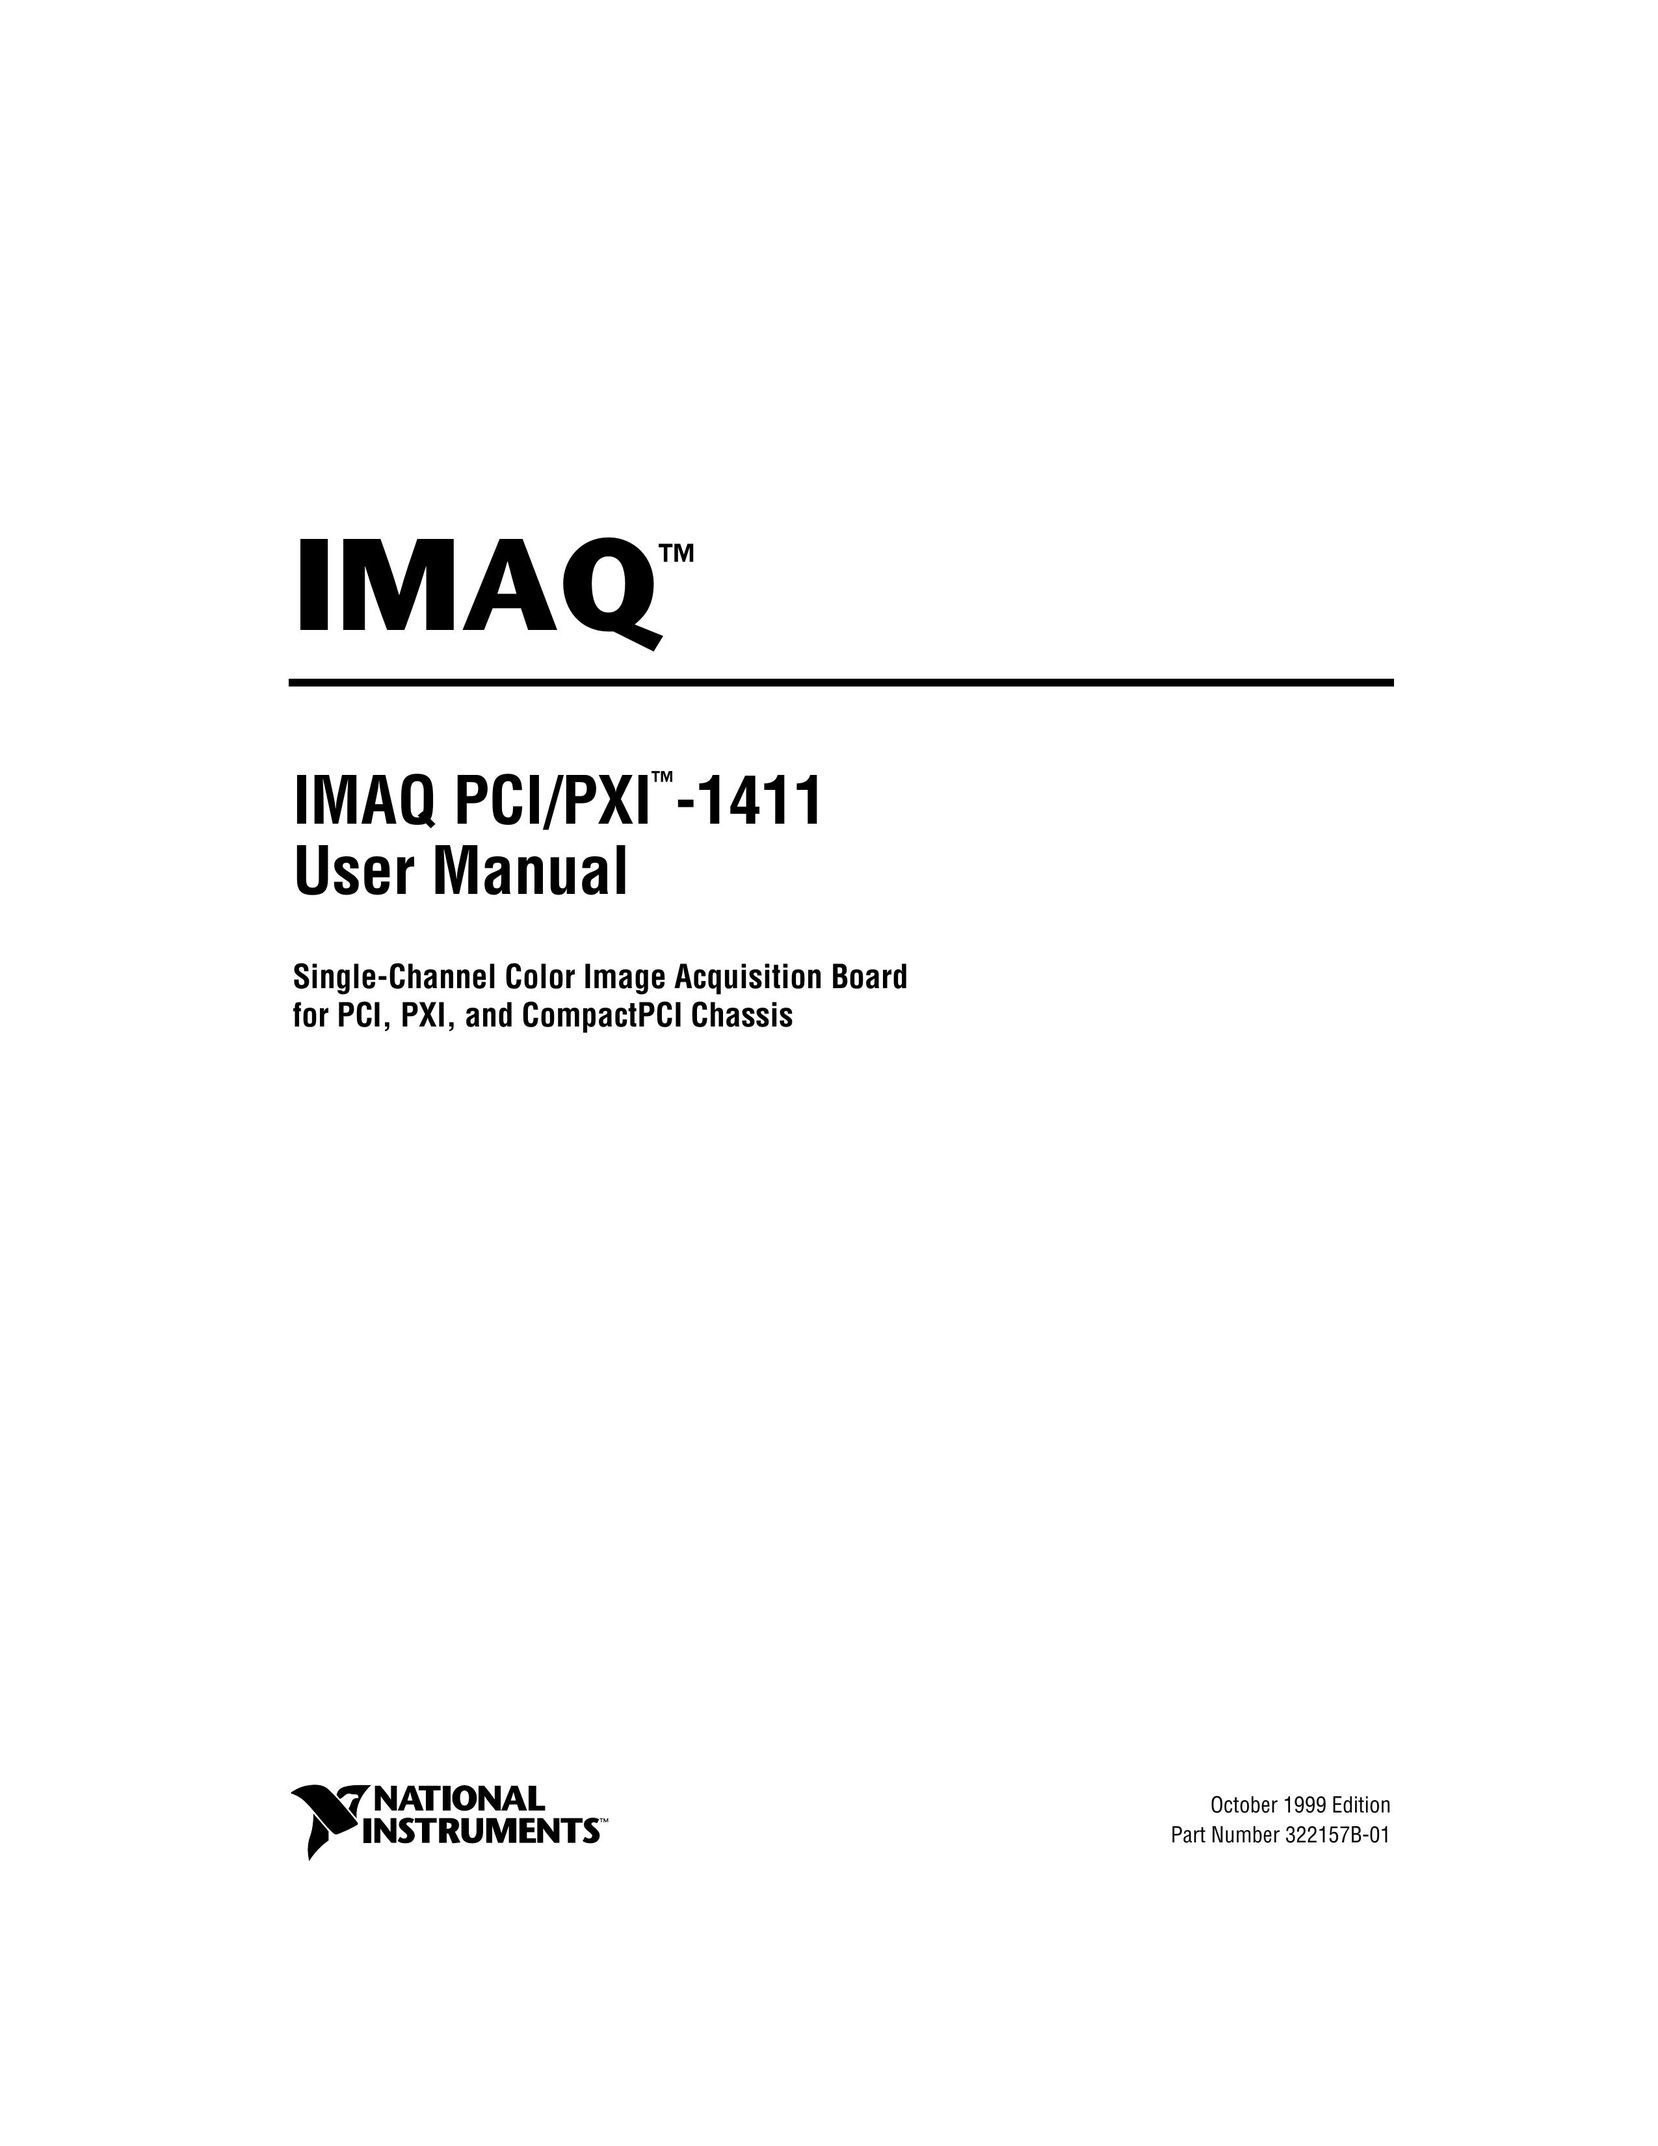 National Instruments PCI-1411 Personal Computer User Manual